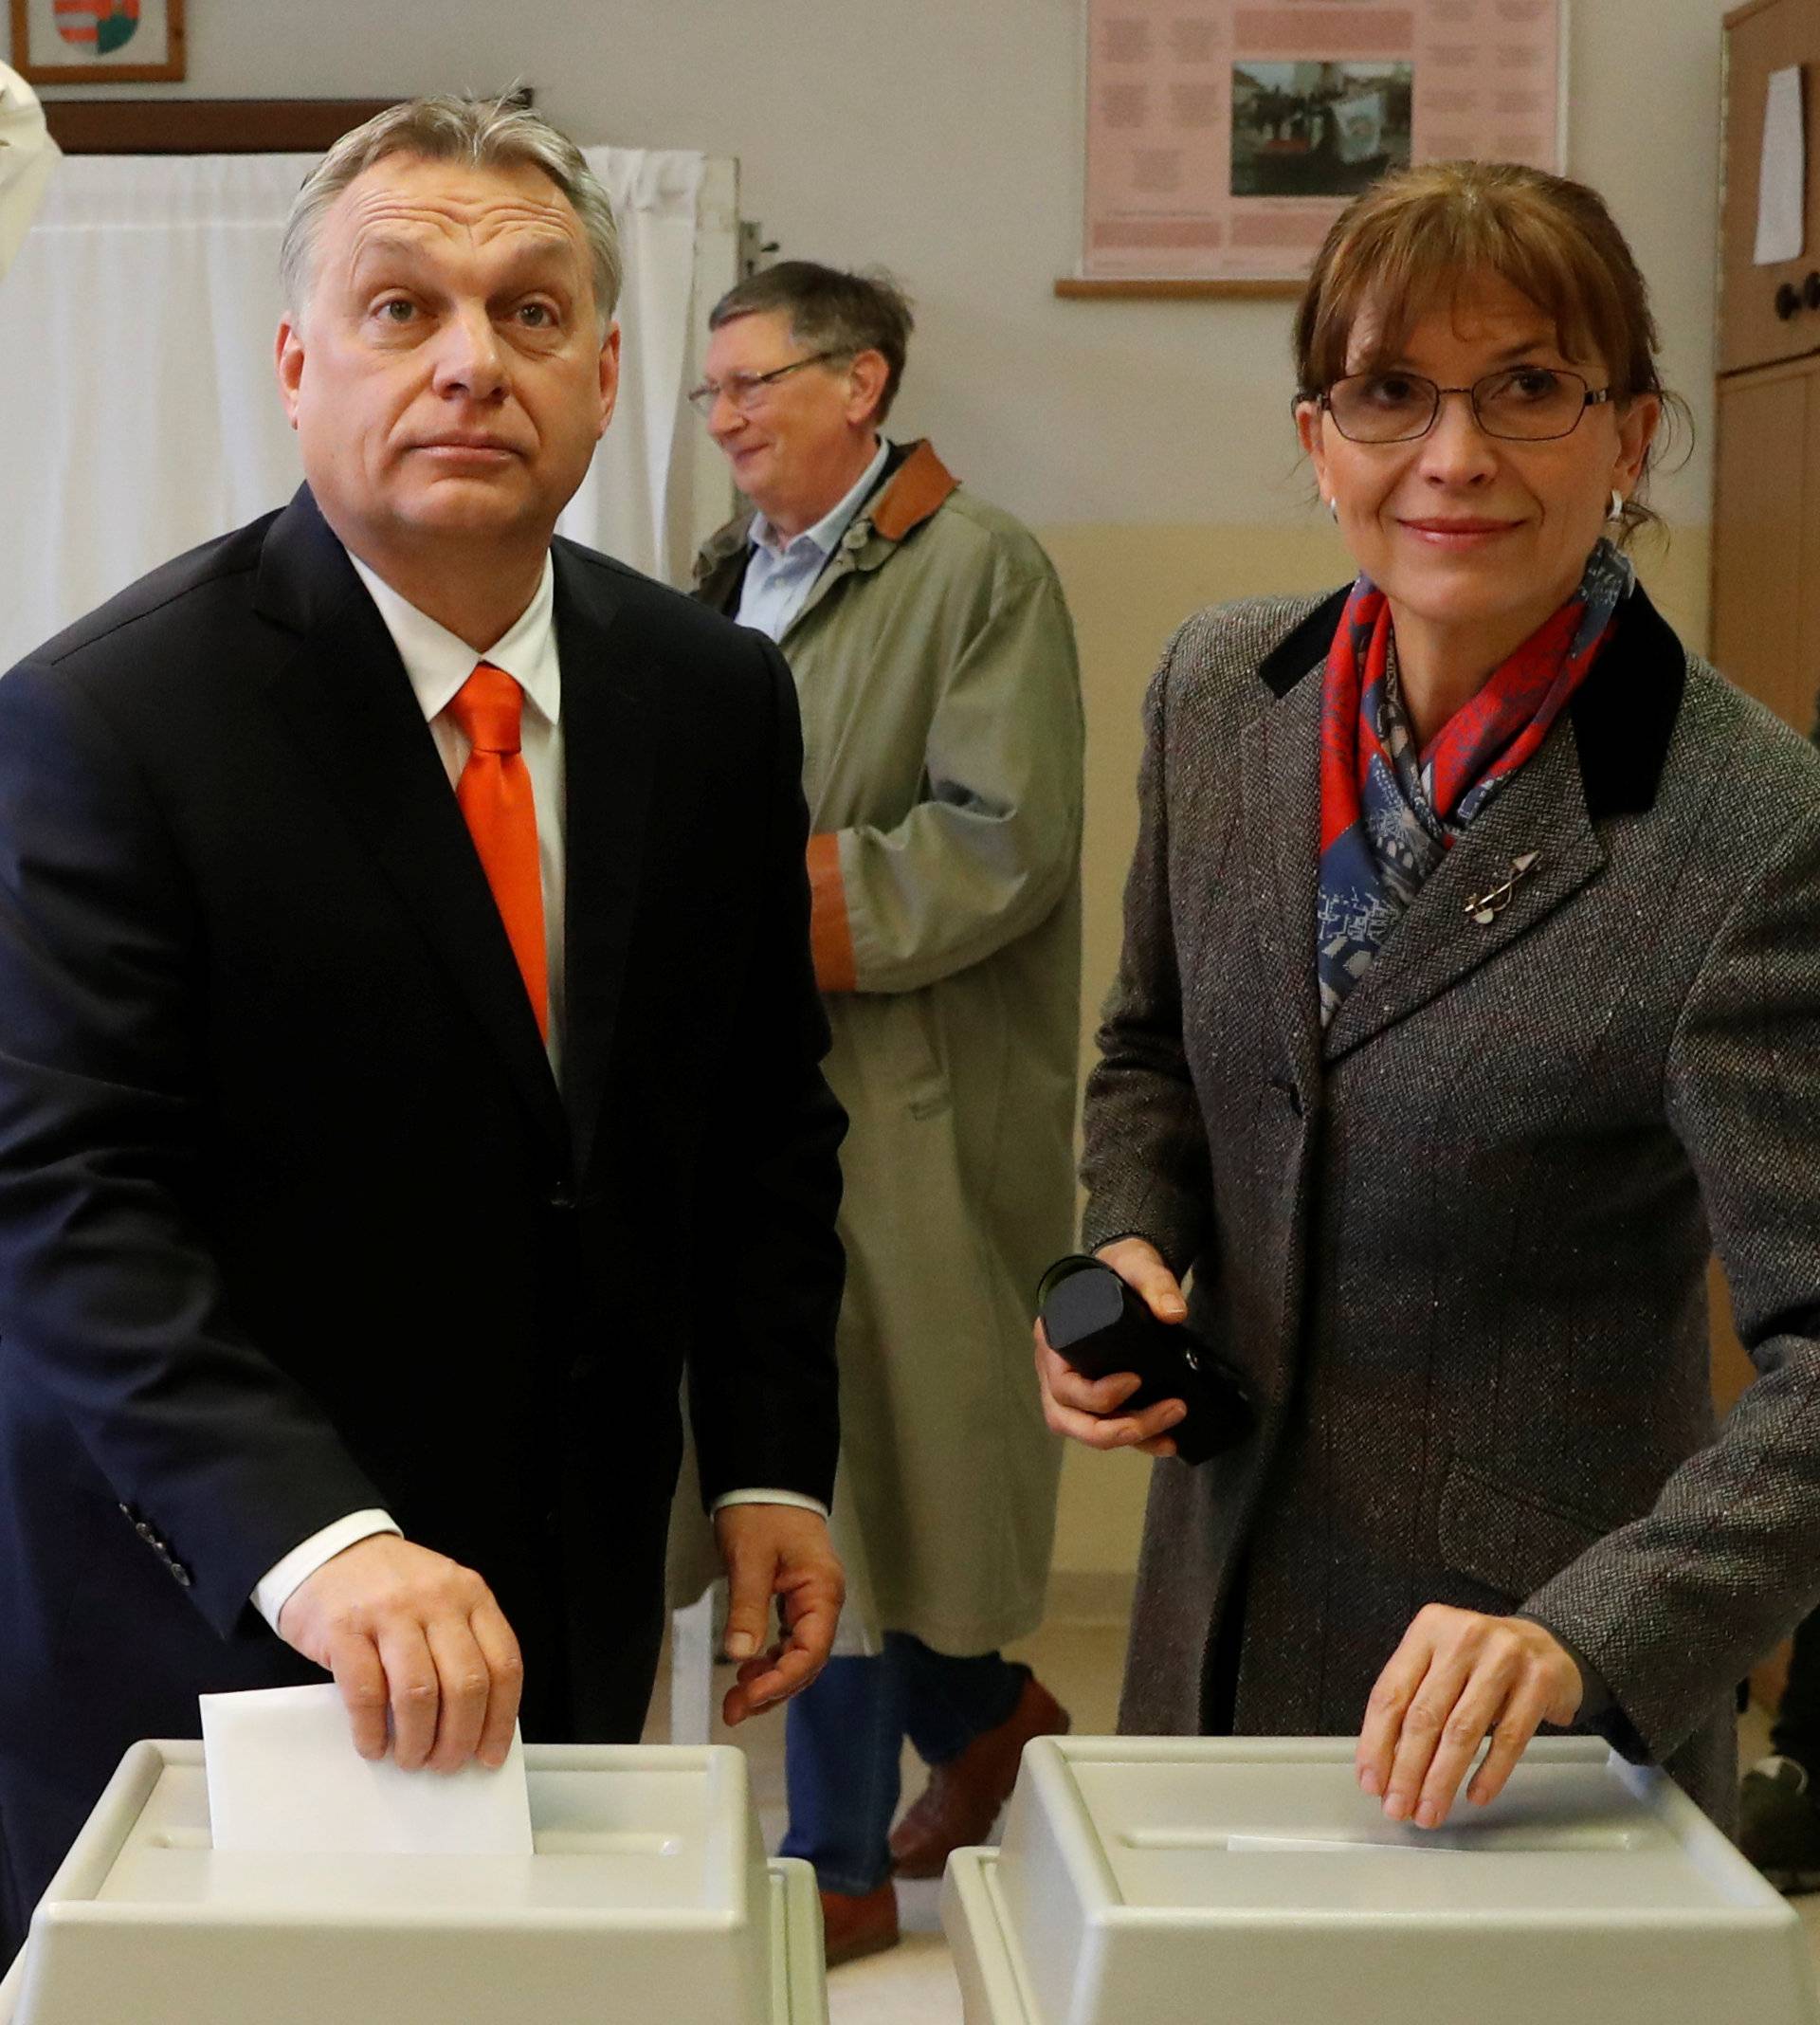 Current Hungarian Prime Minister Viktor Orban and his wife Aniko Levai cast their ballots during Hungarian parliamentary election in Budapest